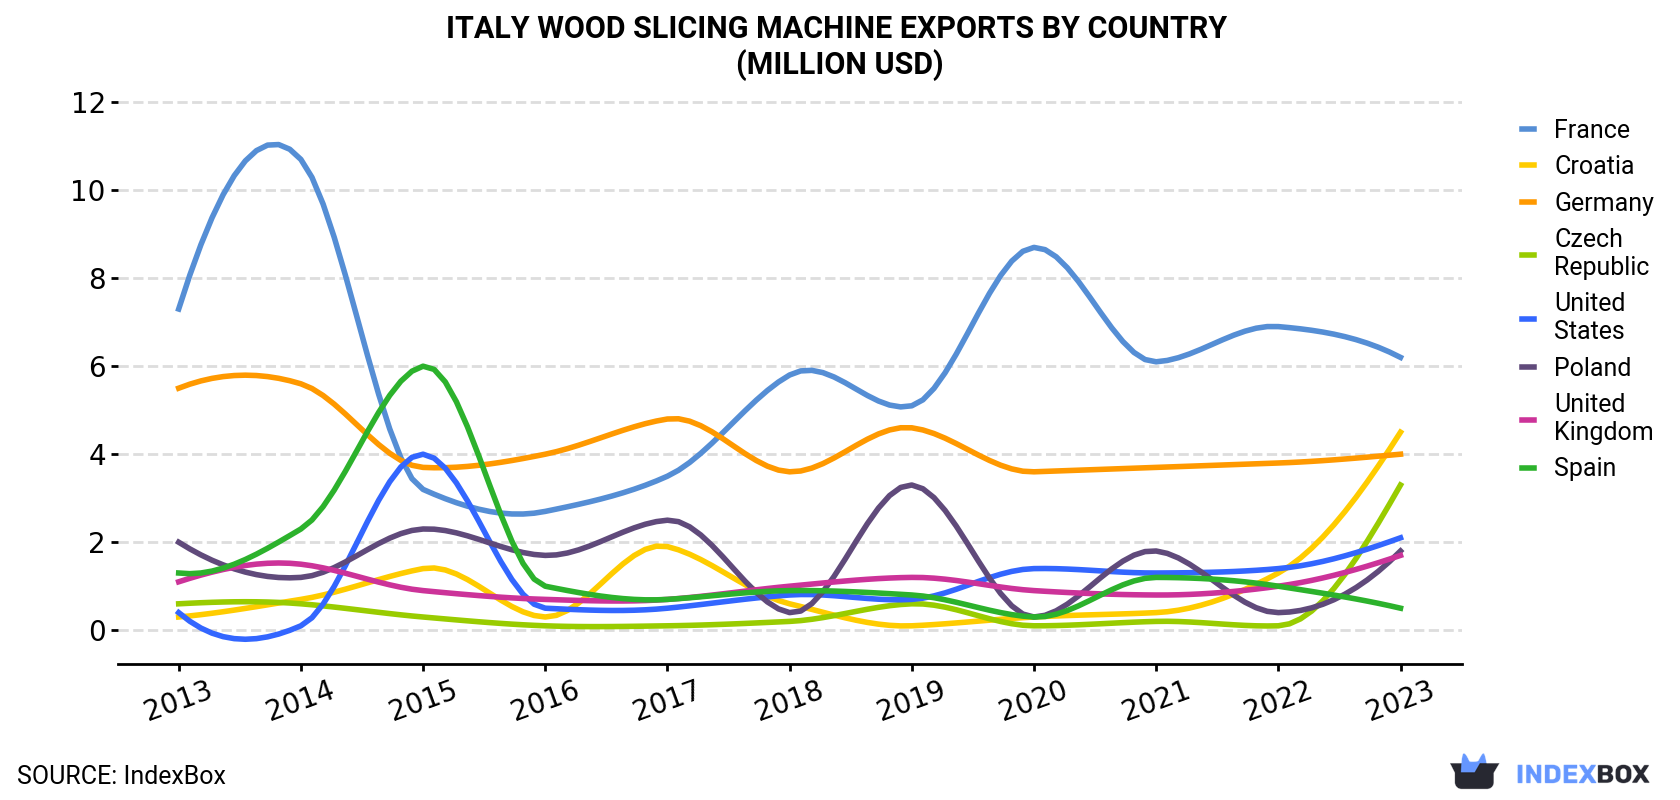 Italy Wood Slicing Machine Exports By Country (Million USD)